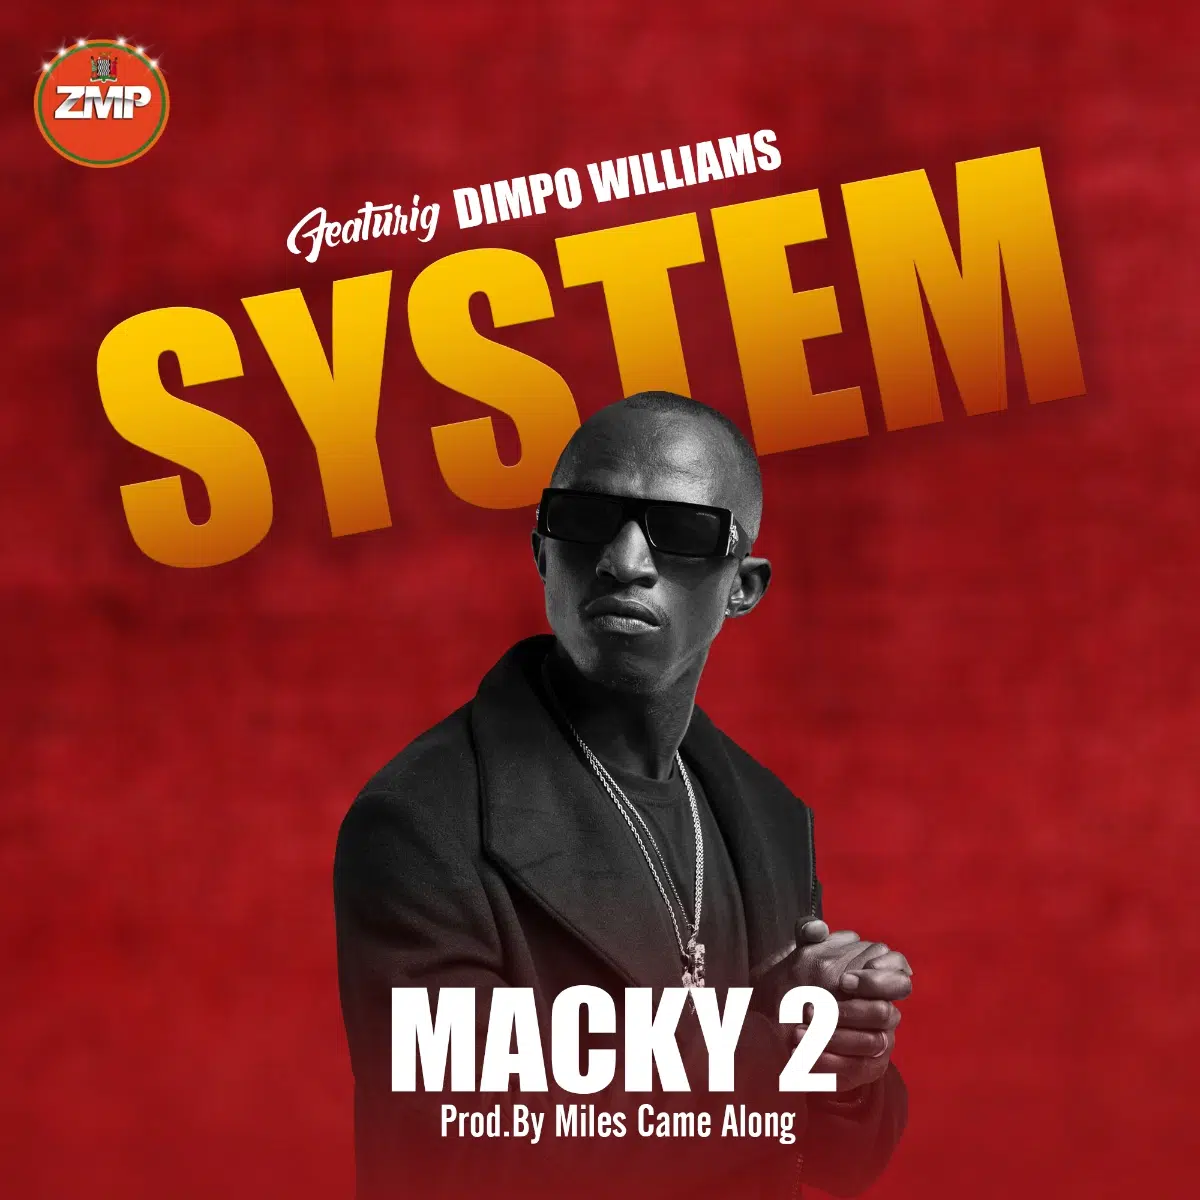 DOWNLOAD: Macky 2 Feat Dimpo Williams – “System” Mp3